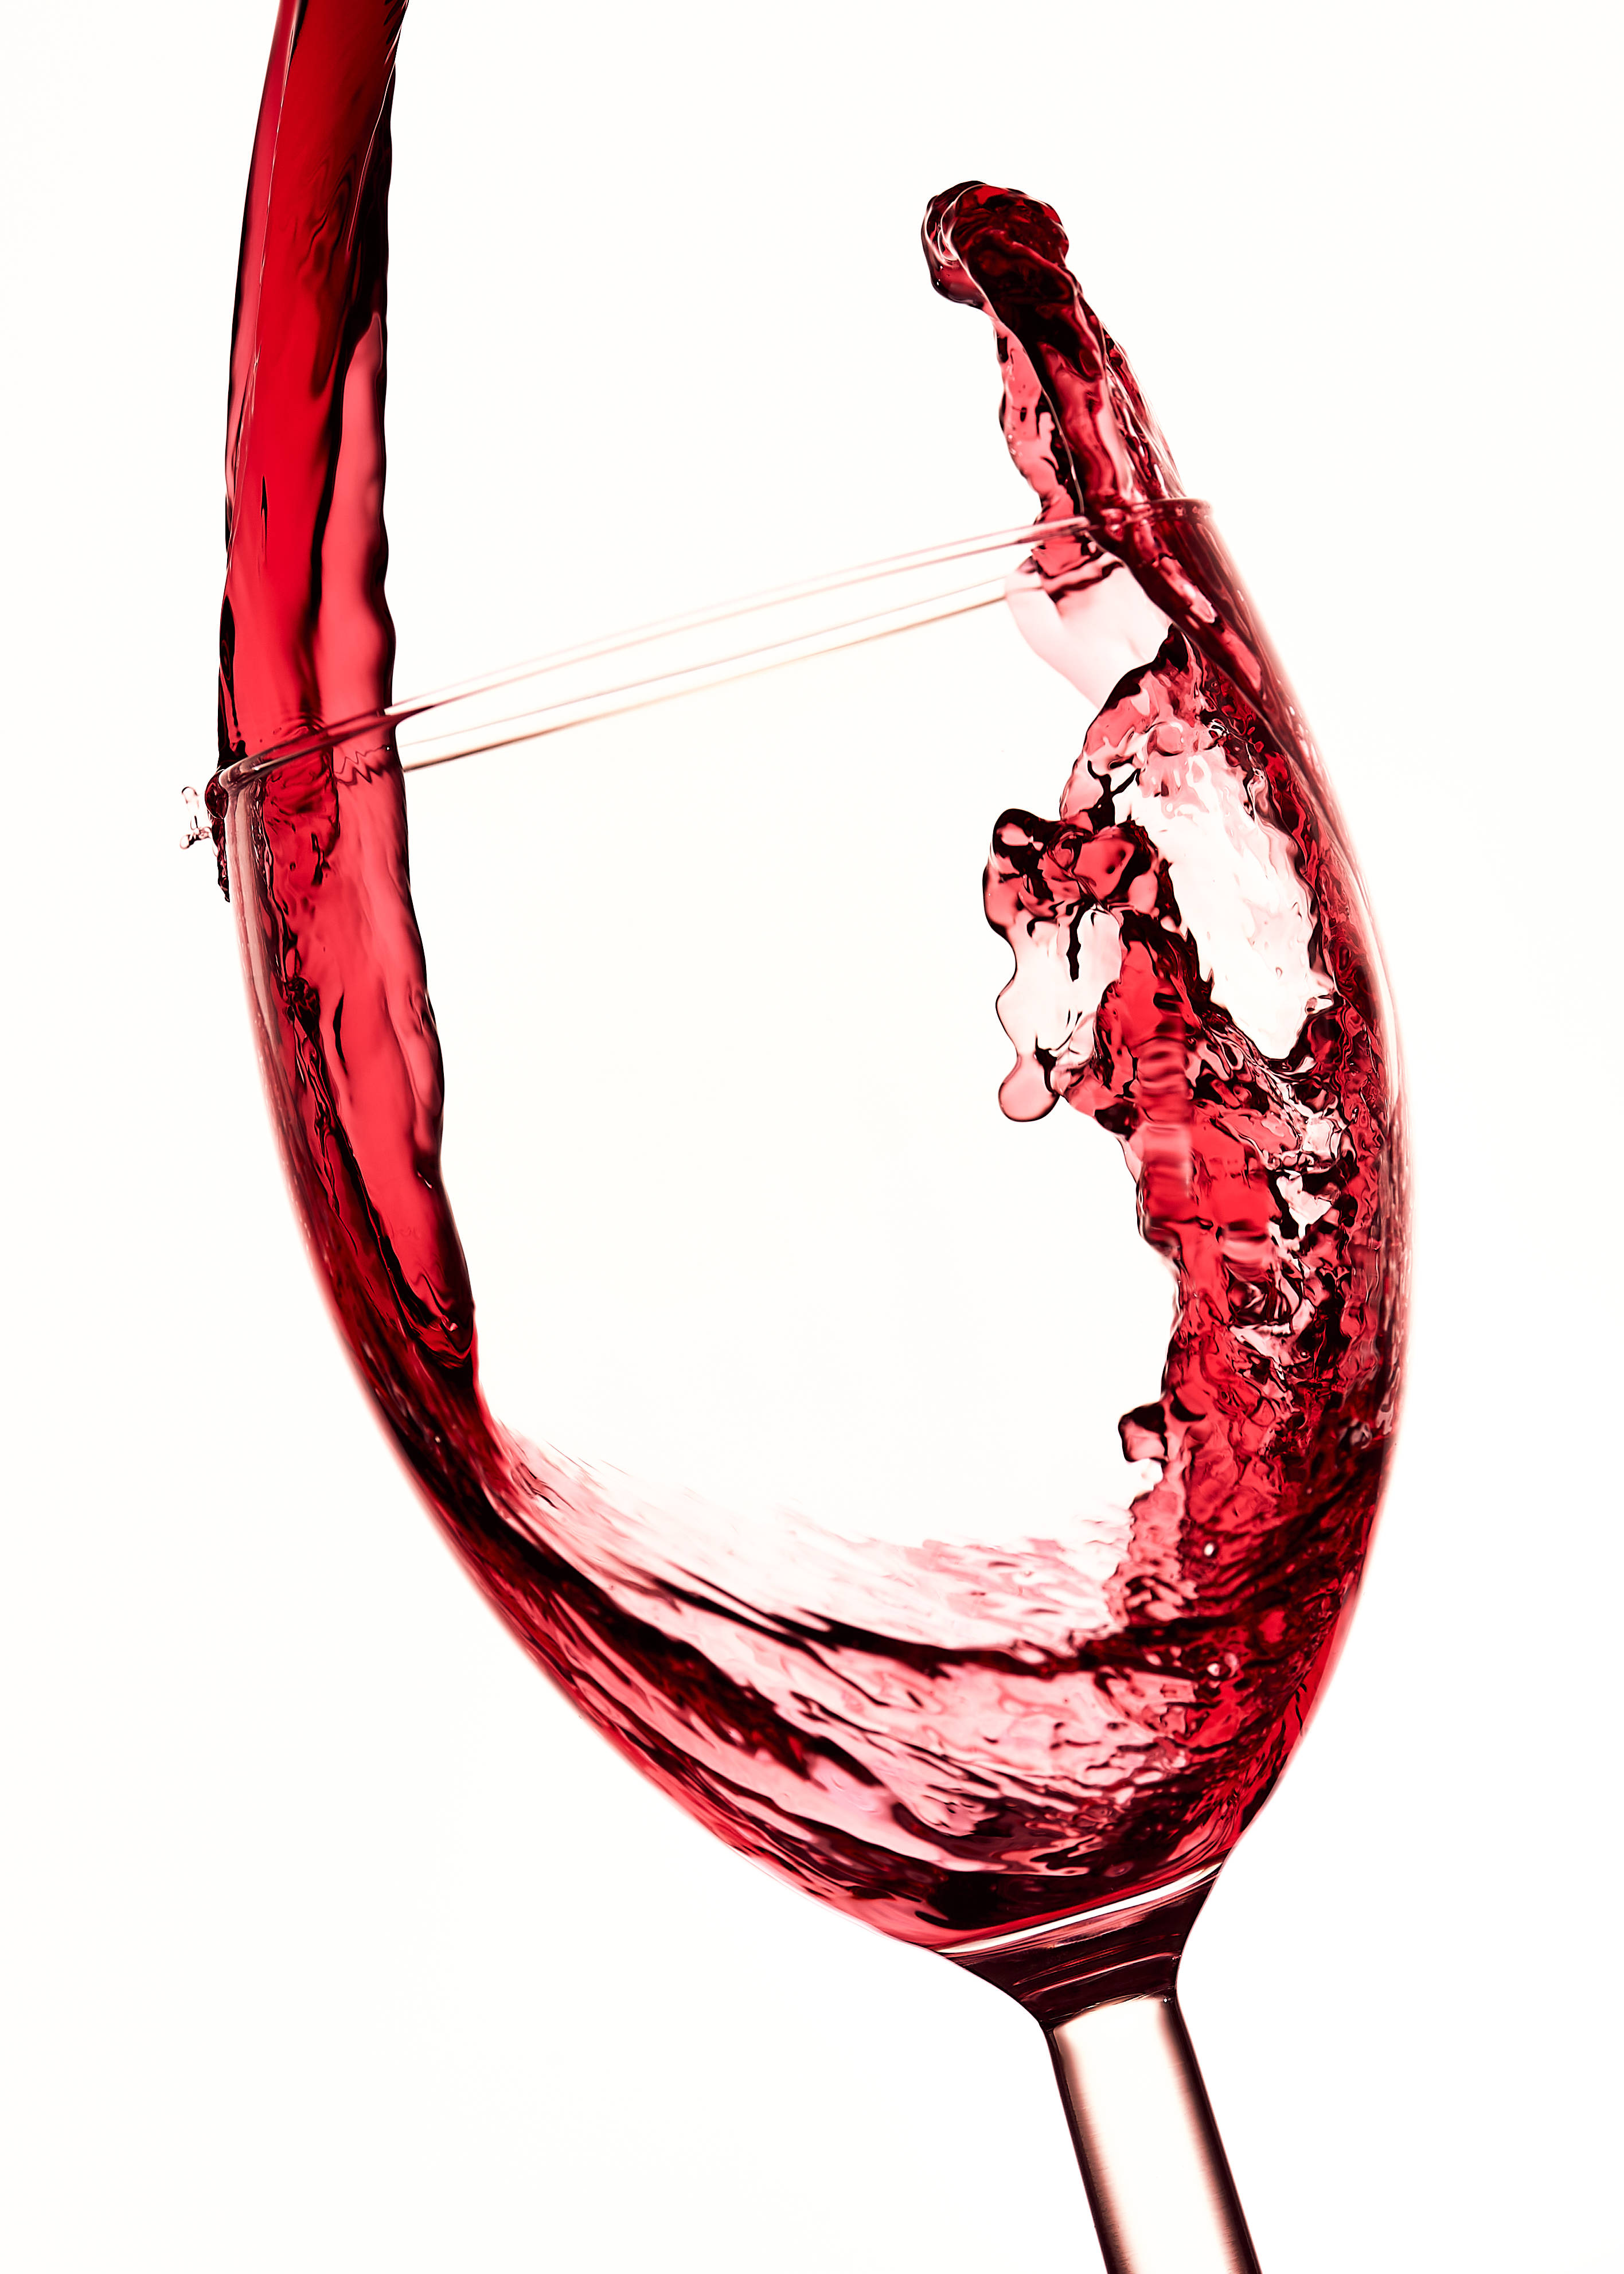 Download Red Wine In Wine Glass Wallpaper